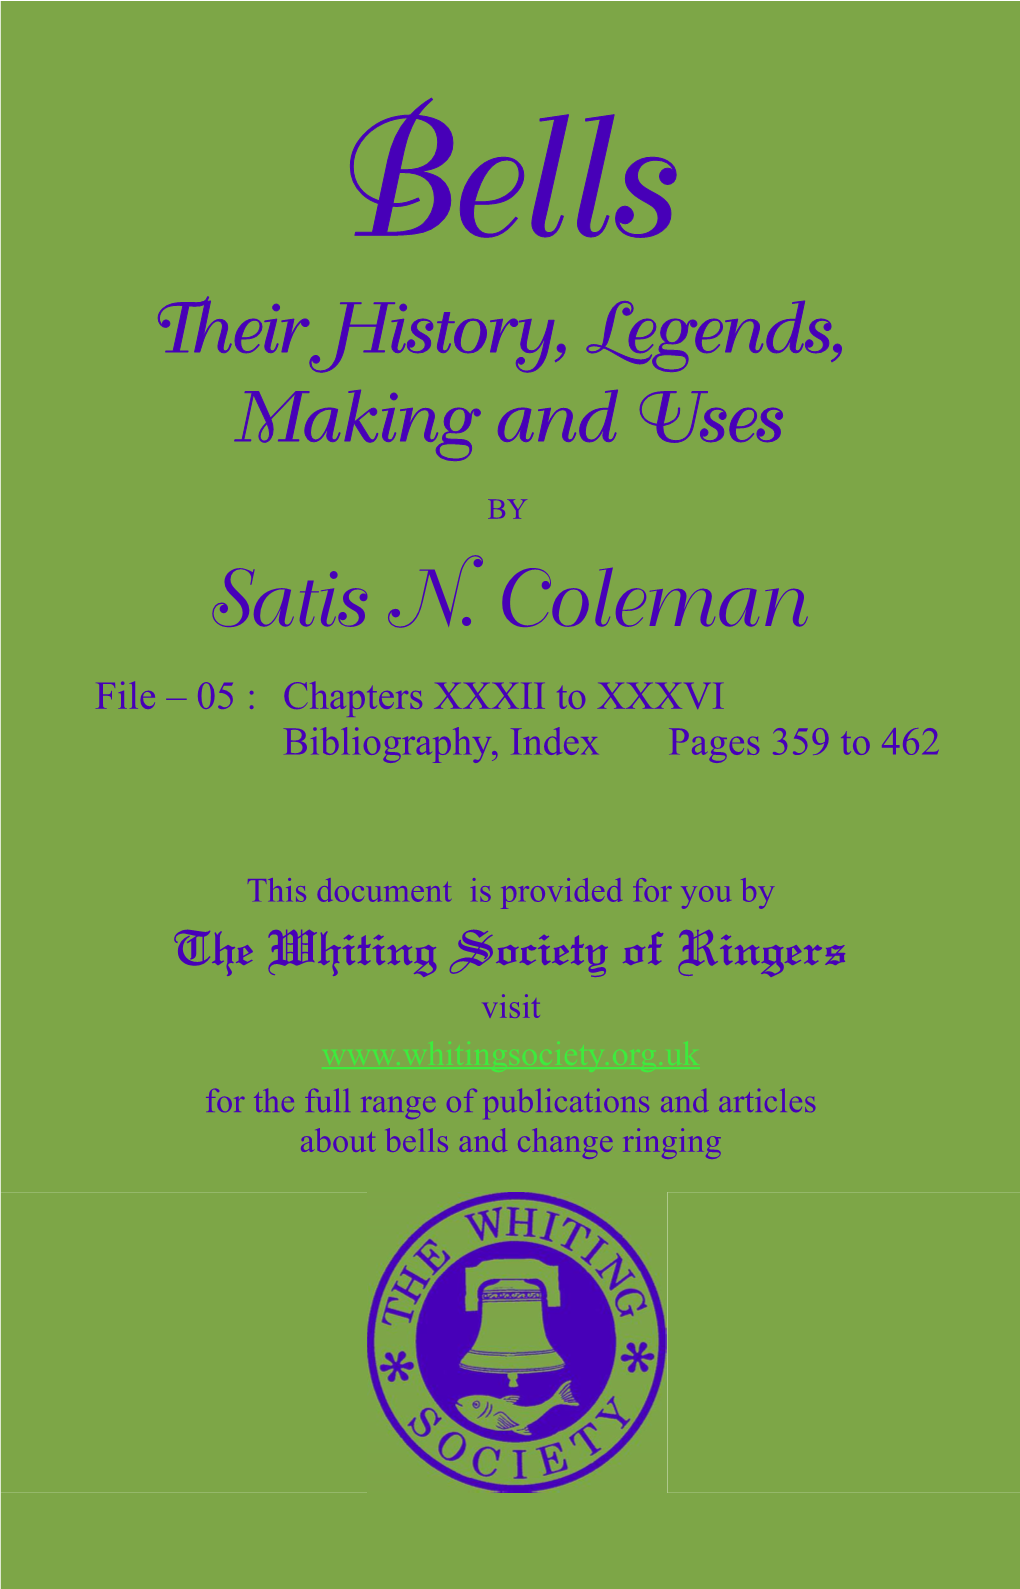 Satis N. Coleman File – 05 : Chapters XXXII to XXXVI Bibliography, Index Pages 359 to 462